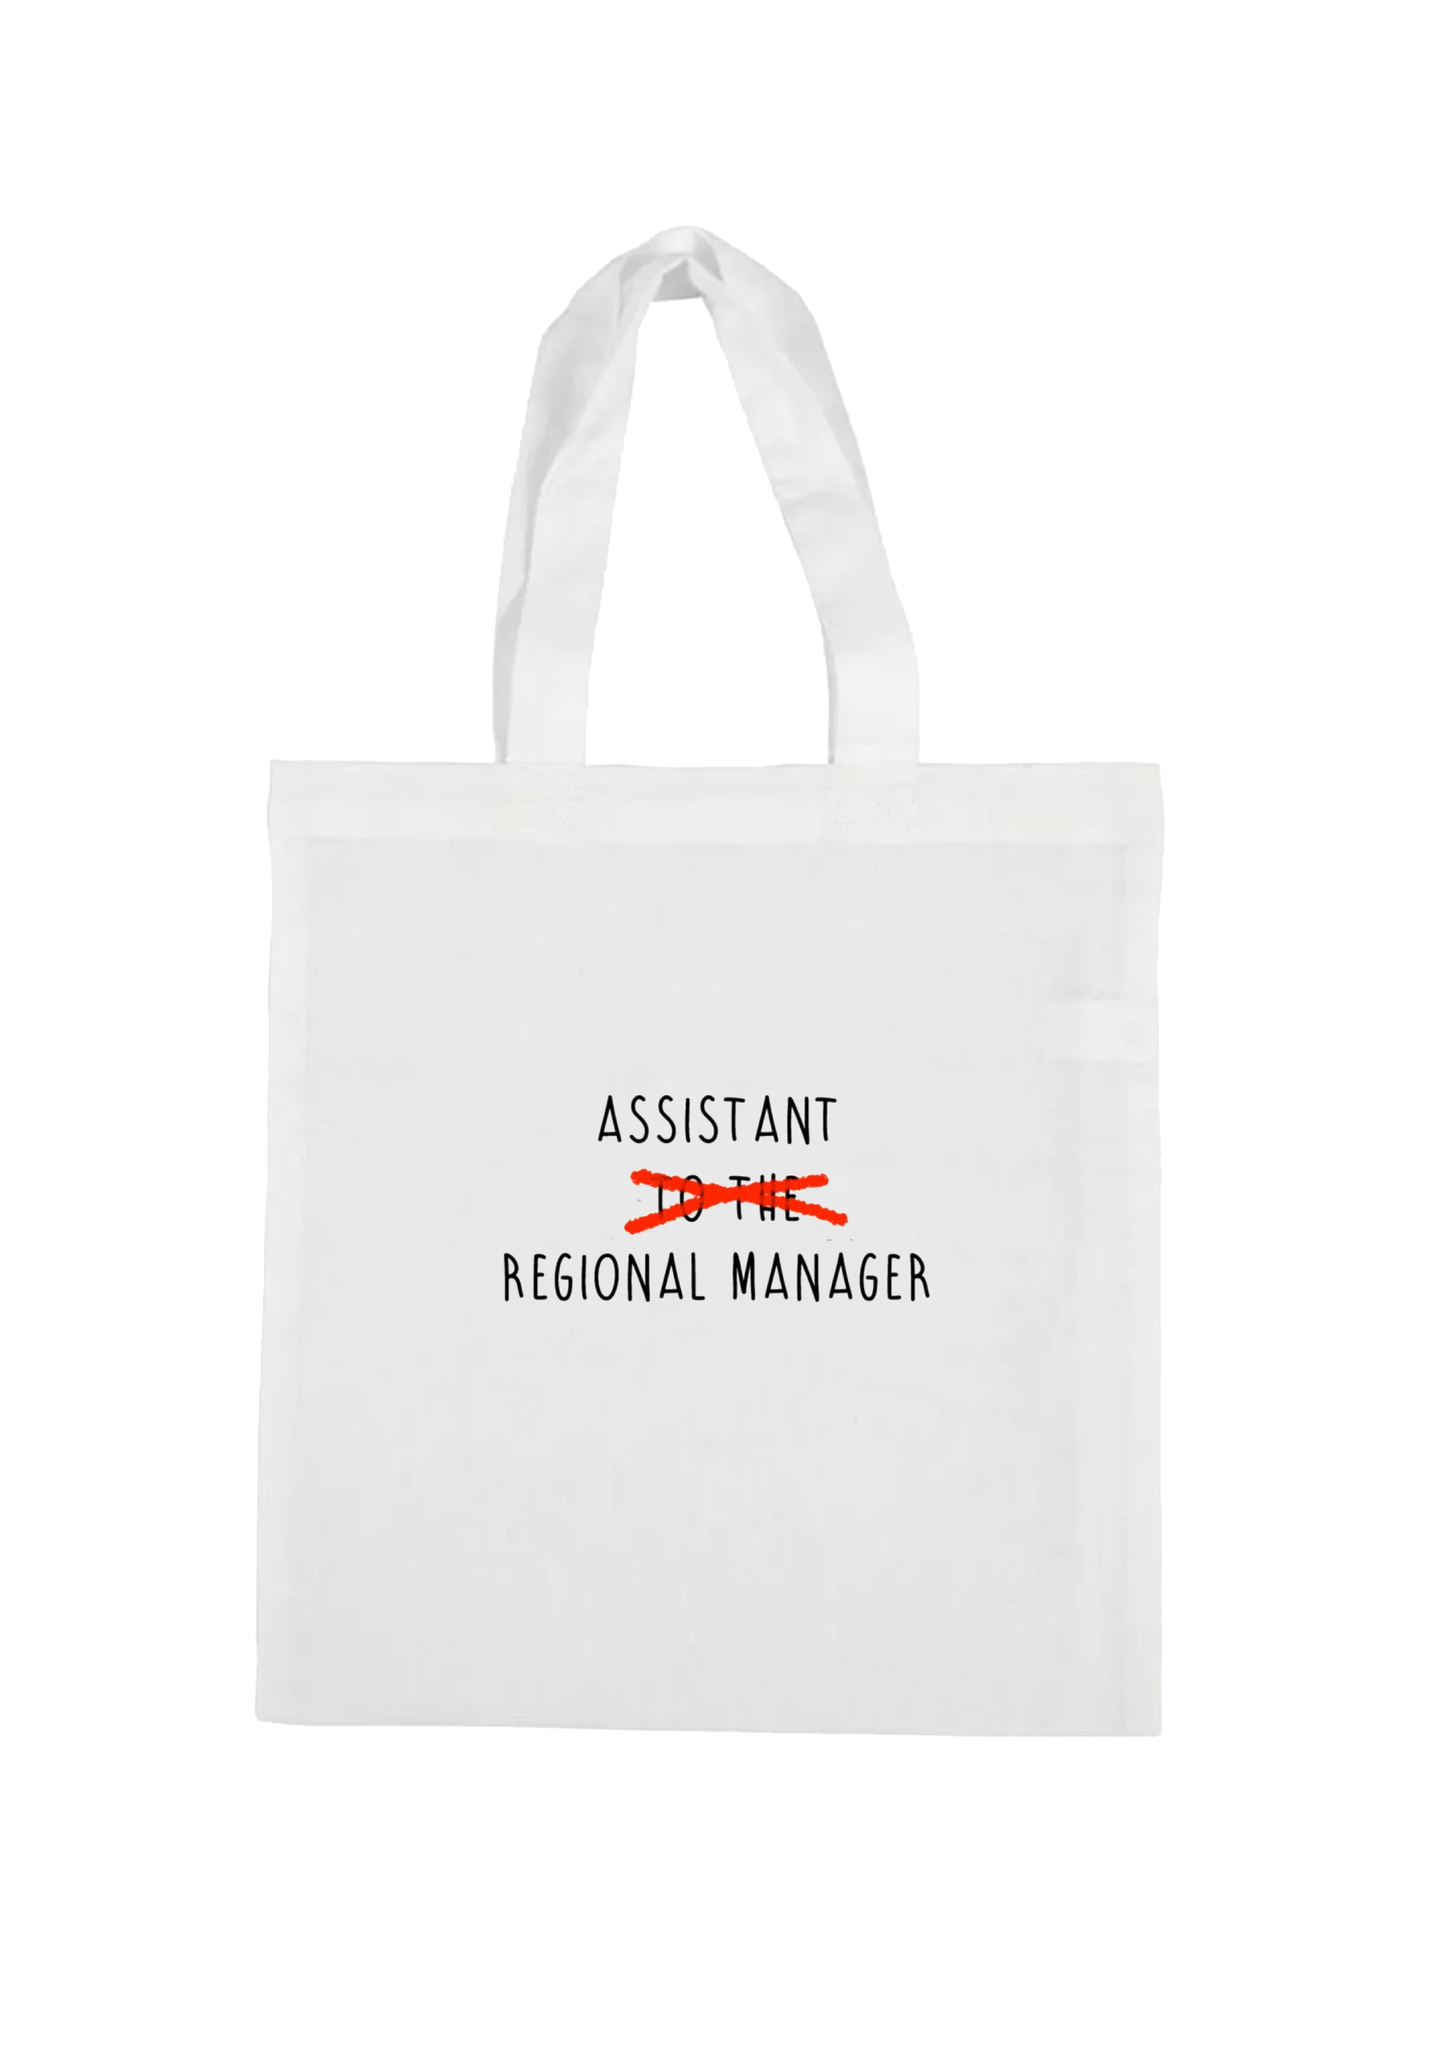 borsa shopping bag-assistant regional manager office Dwight Schrute